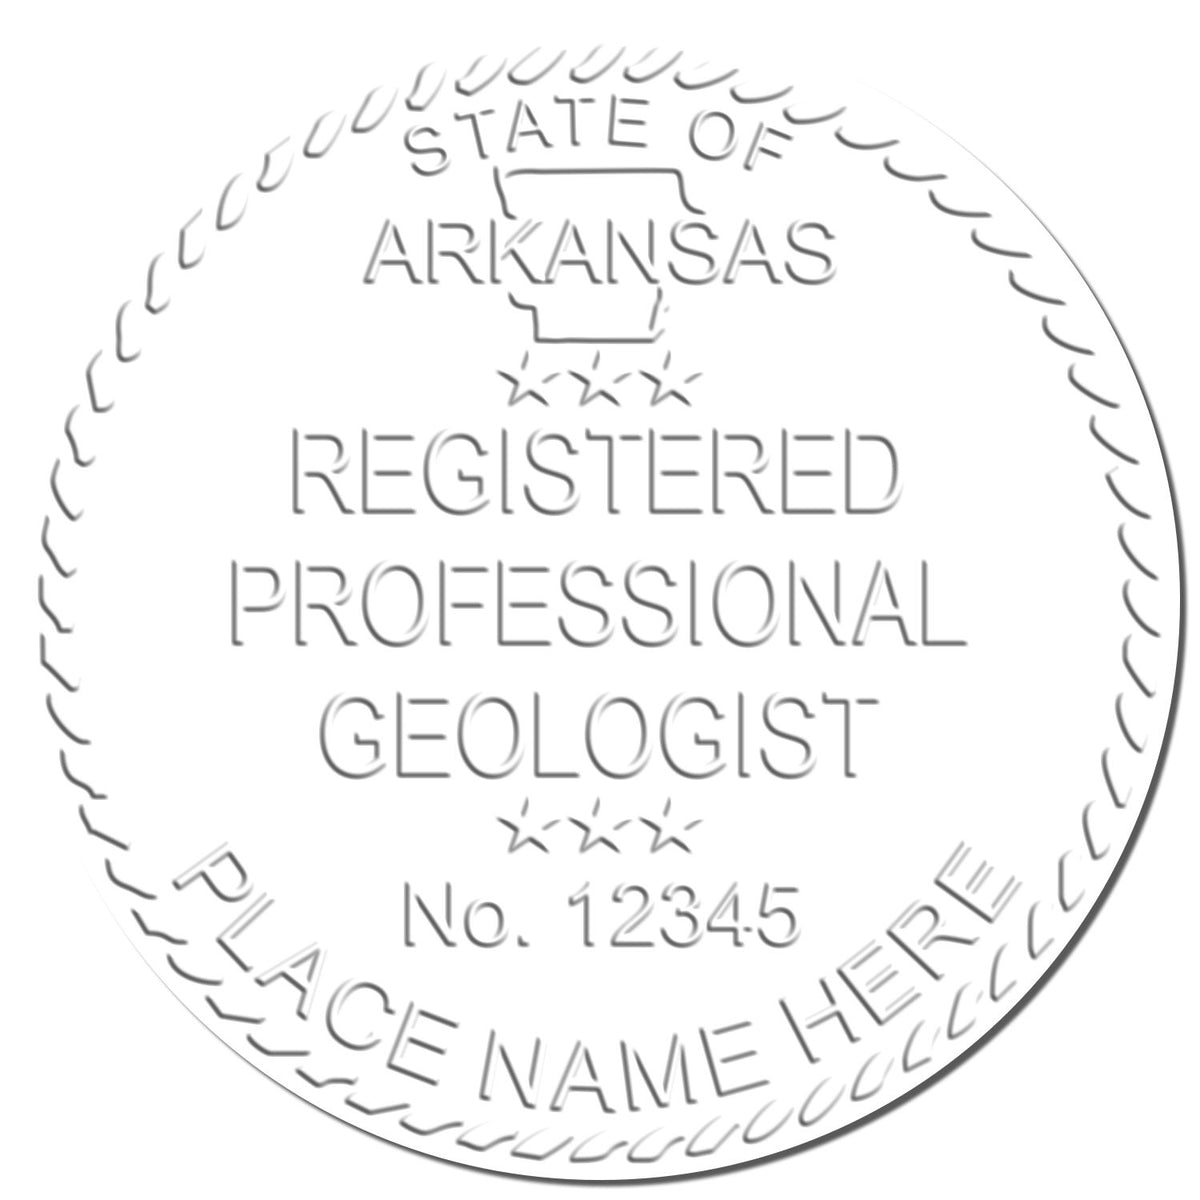 The Arkansas Geologist Desk Seal stamp impression comes to life with a crisp, detailed image stamped on paper - showcasing true professional quality.